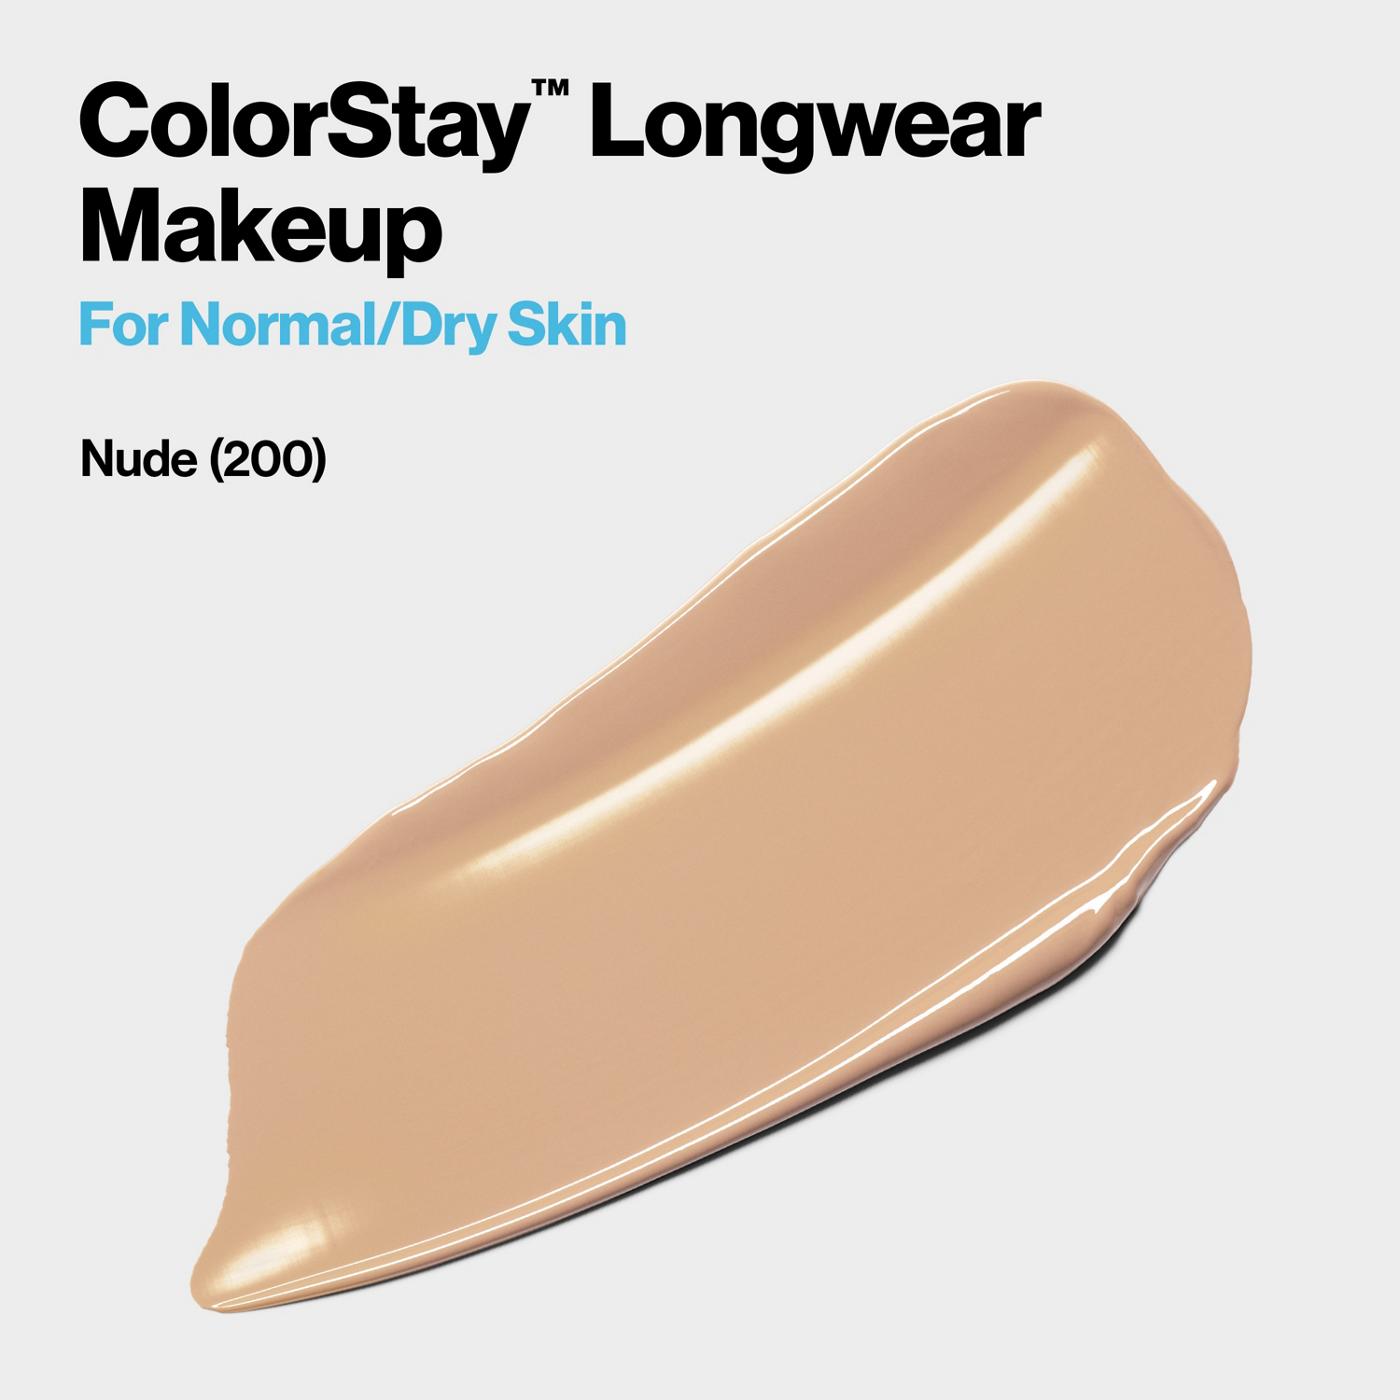 Revlon ColorStay Makeup for Normal/Dry Skin, 200 Nude; image 5 of 6